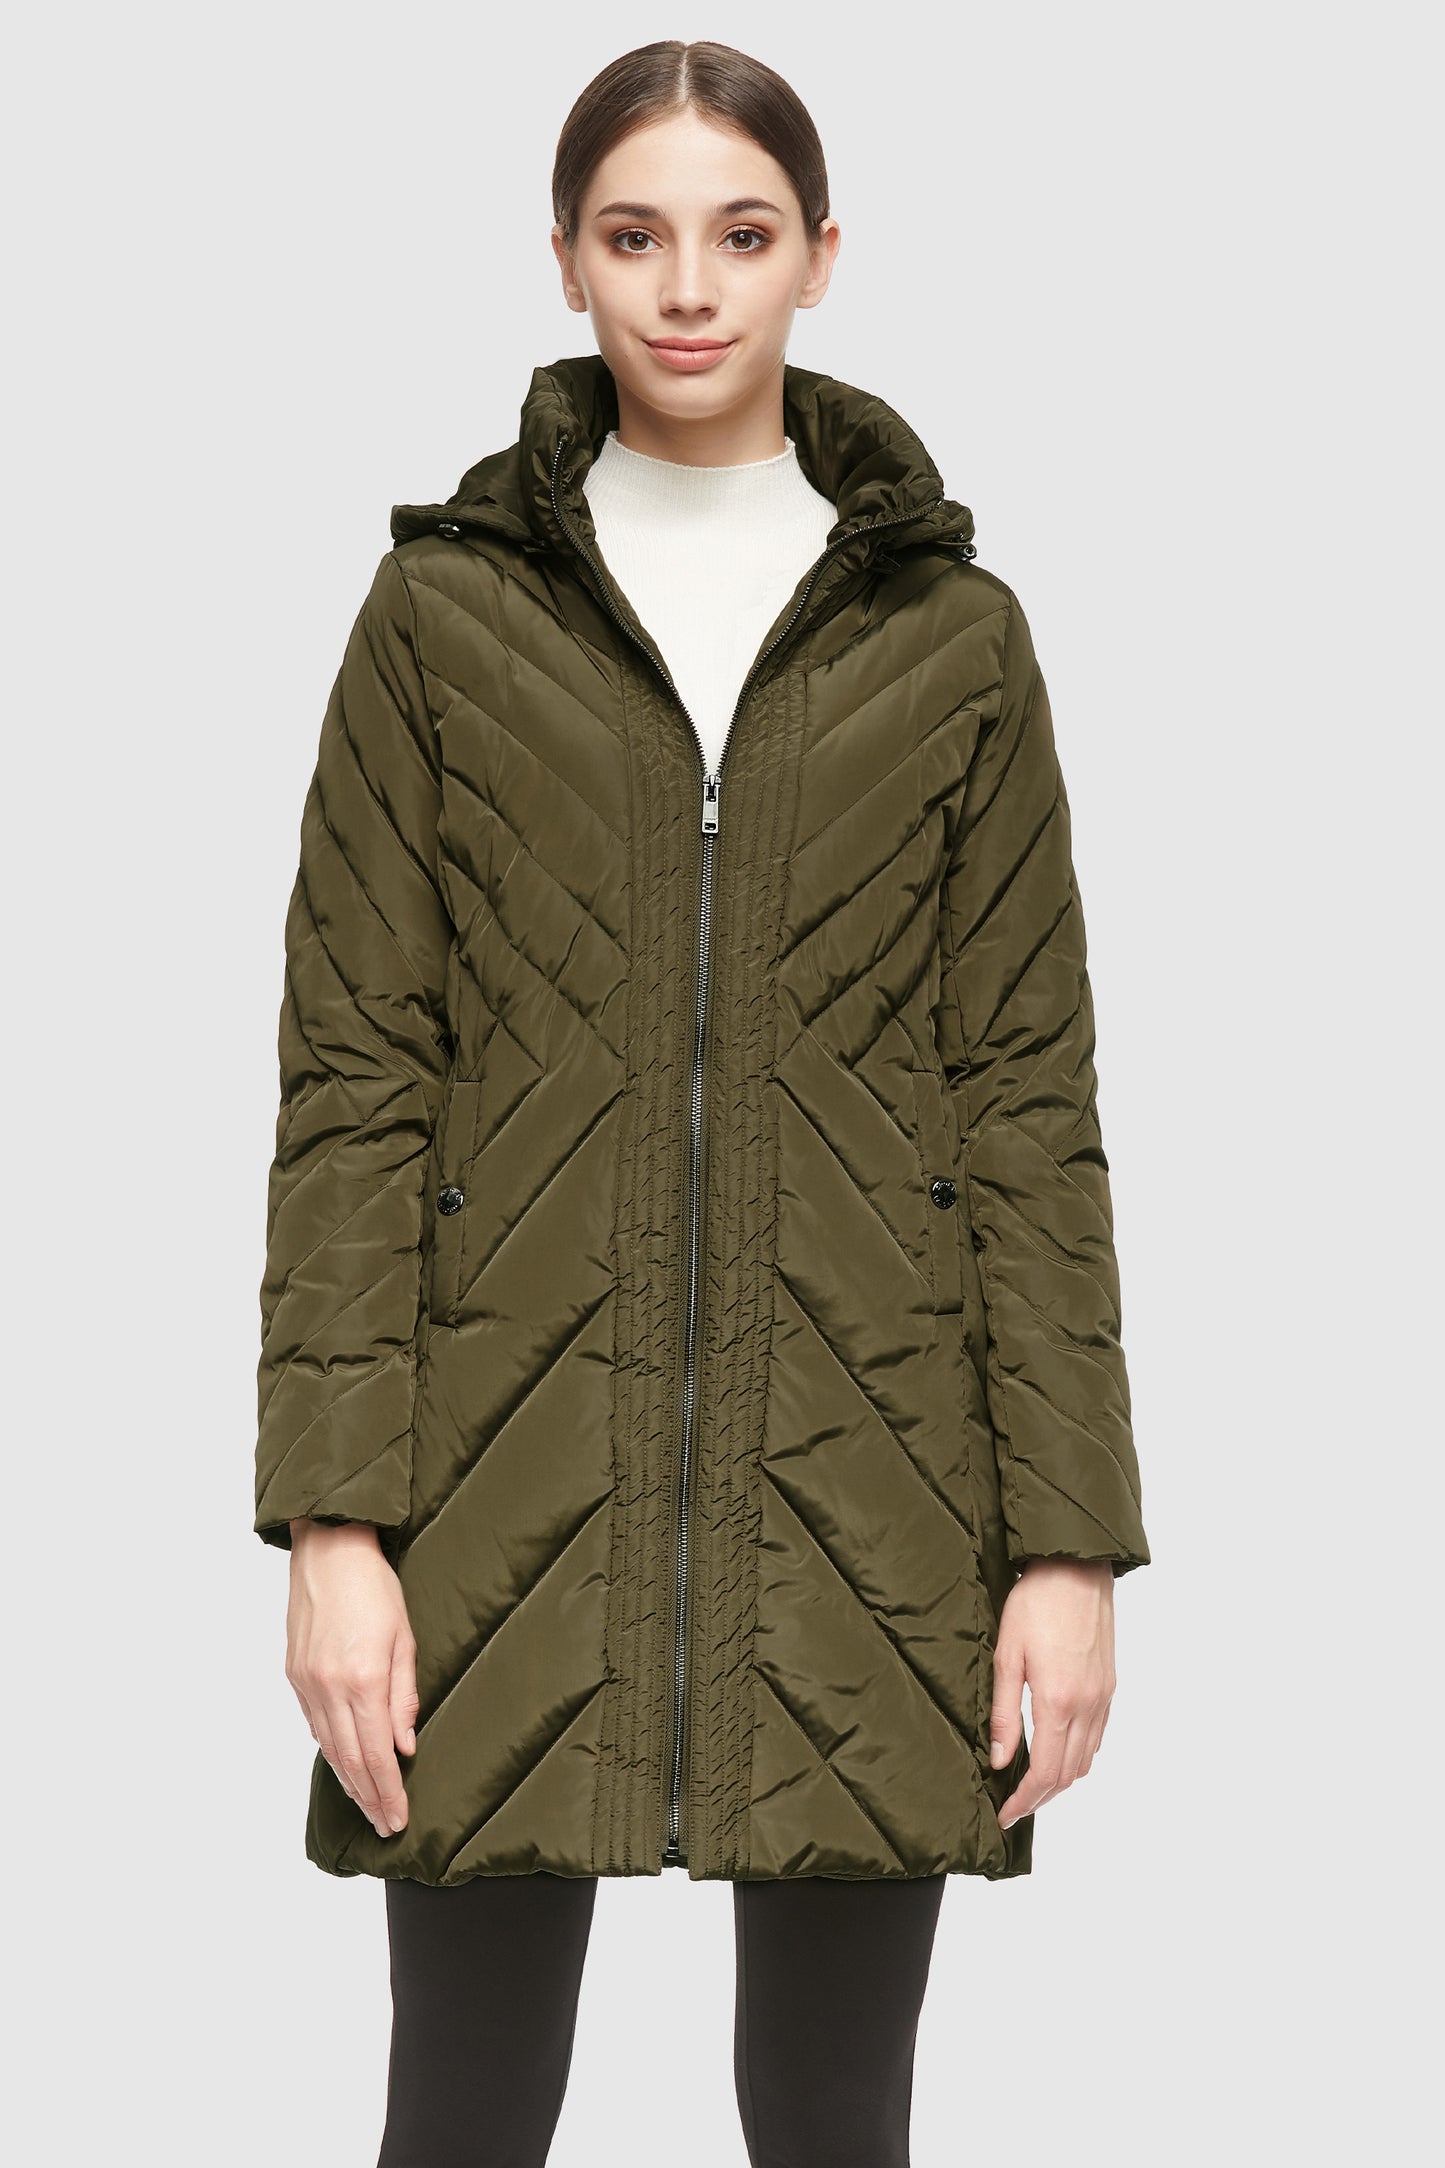 Removable Hooded Winter Coat